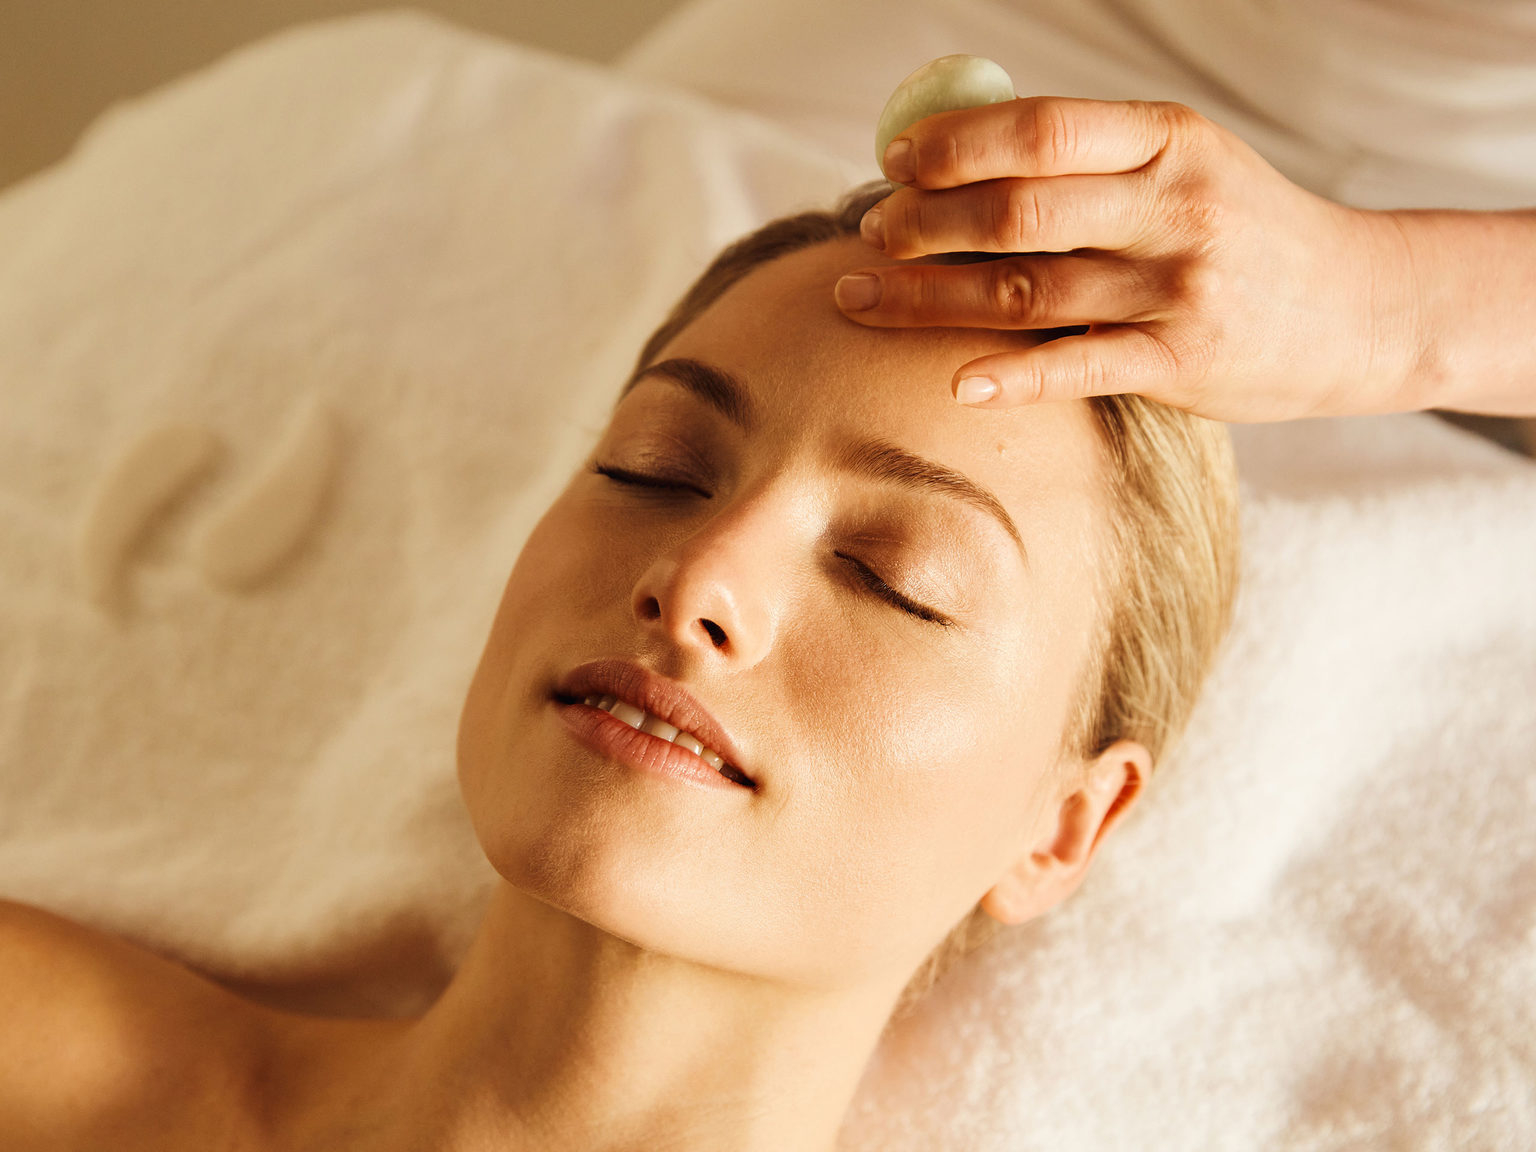 A woman having a facial with jade stones during a relaxing spa day